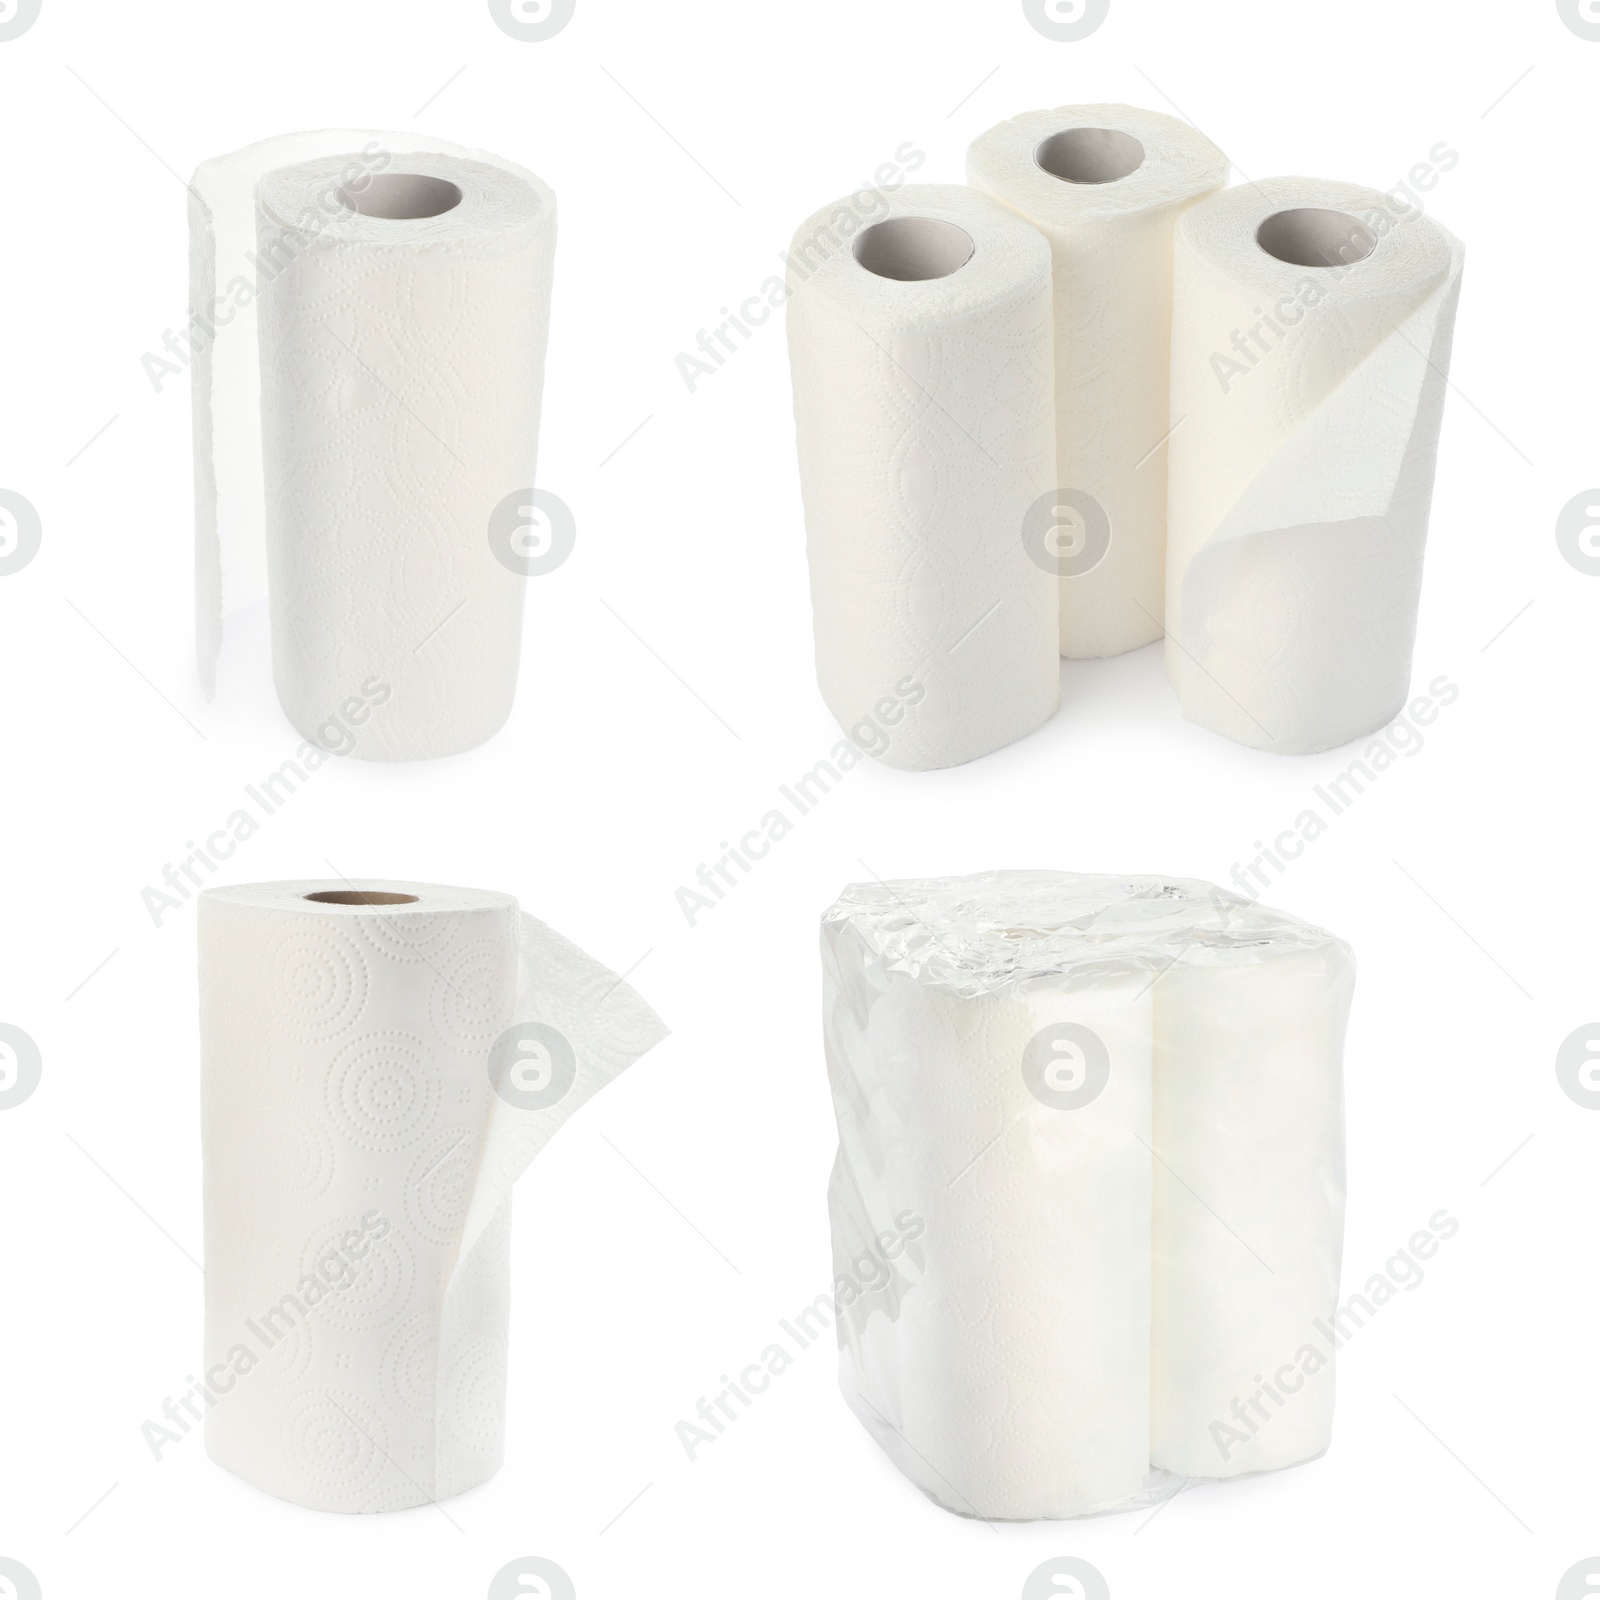 Image of Set of paper towels on white background